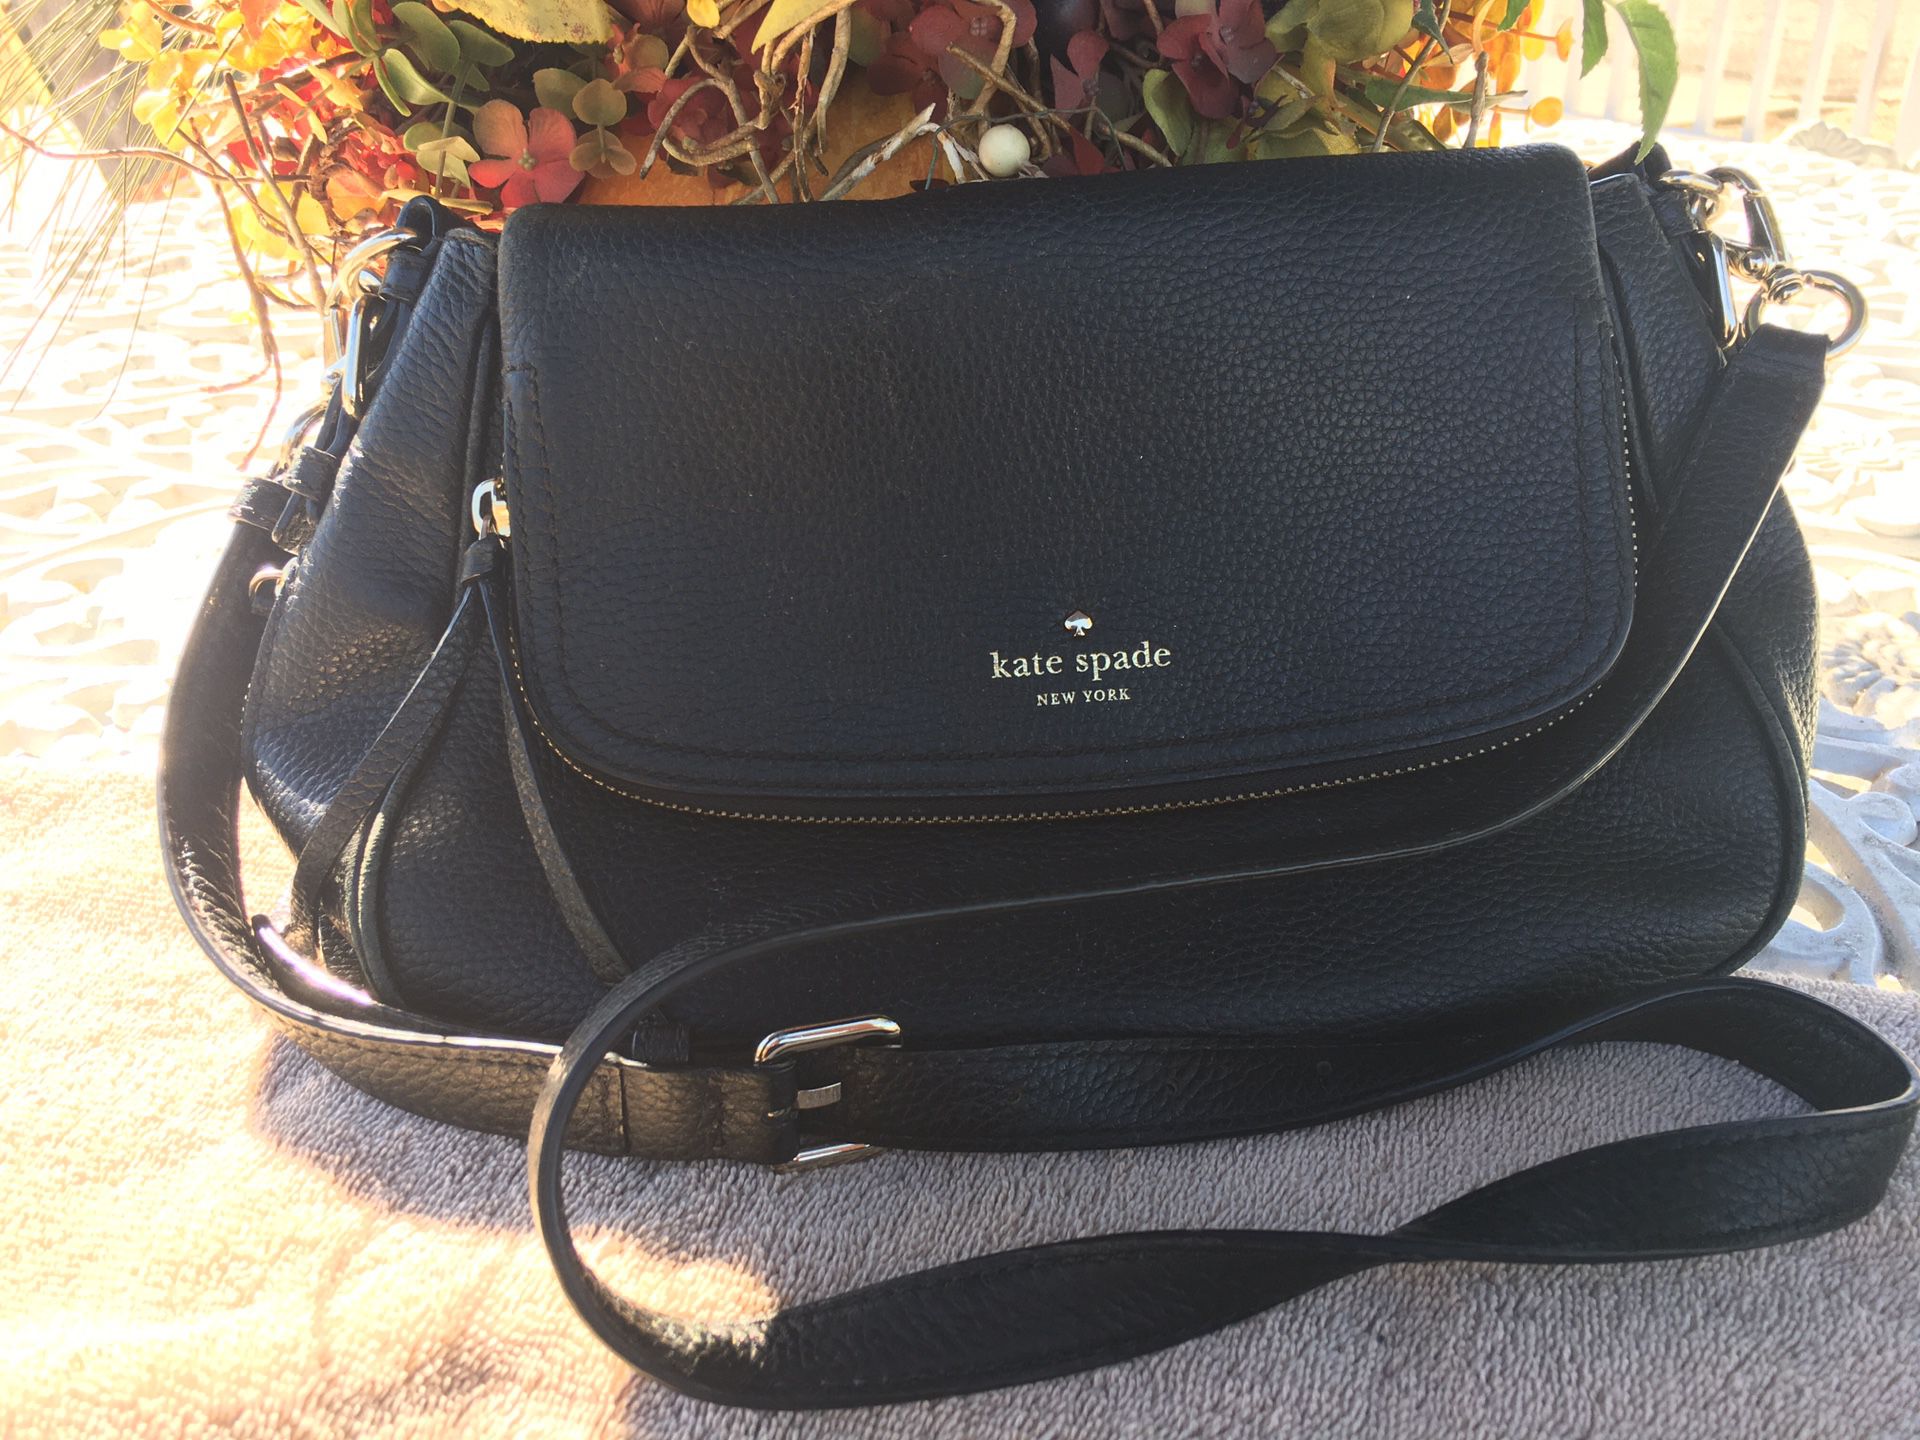 Kate Spade New York Women’s Used Hand Bags $35